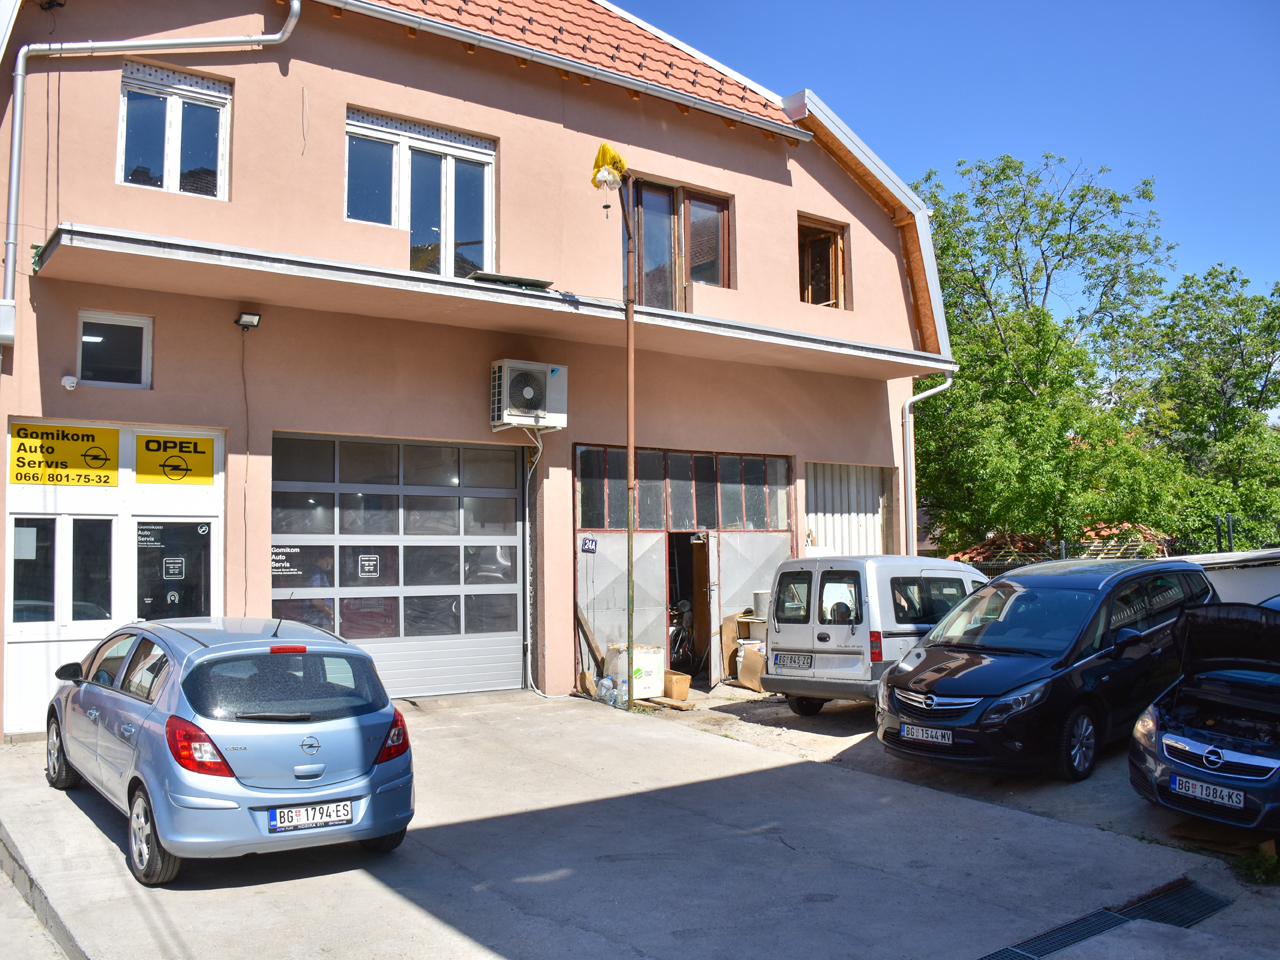 OPEL GOMIKOM Replacement parts Beograd